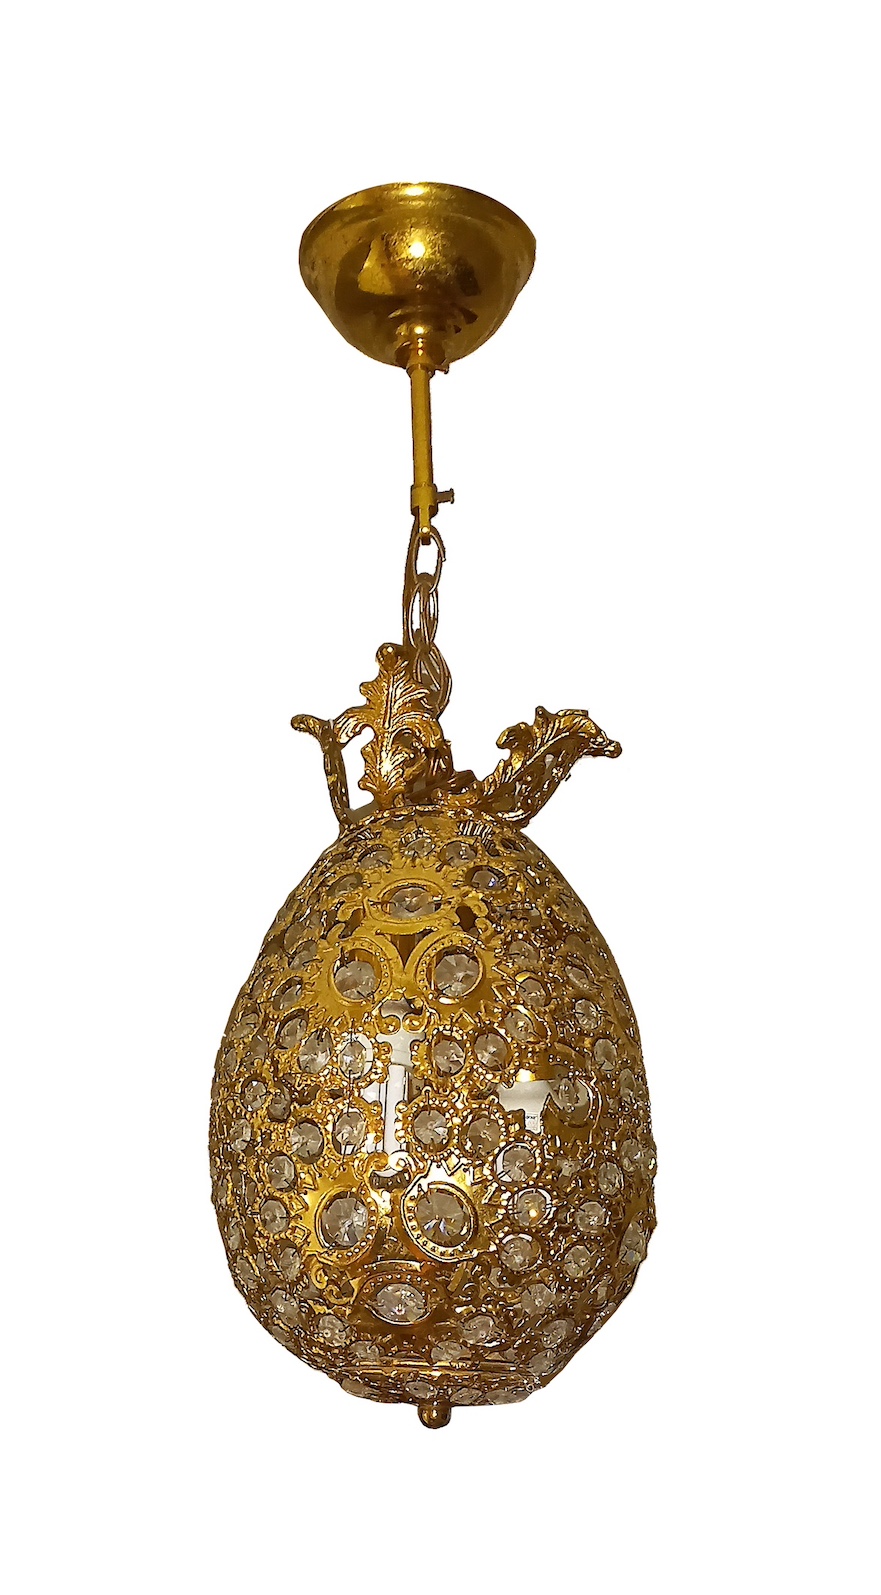 A reticulated brass pineapple form hanging lamp